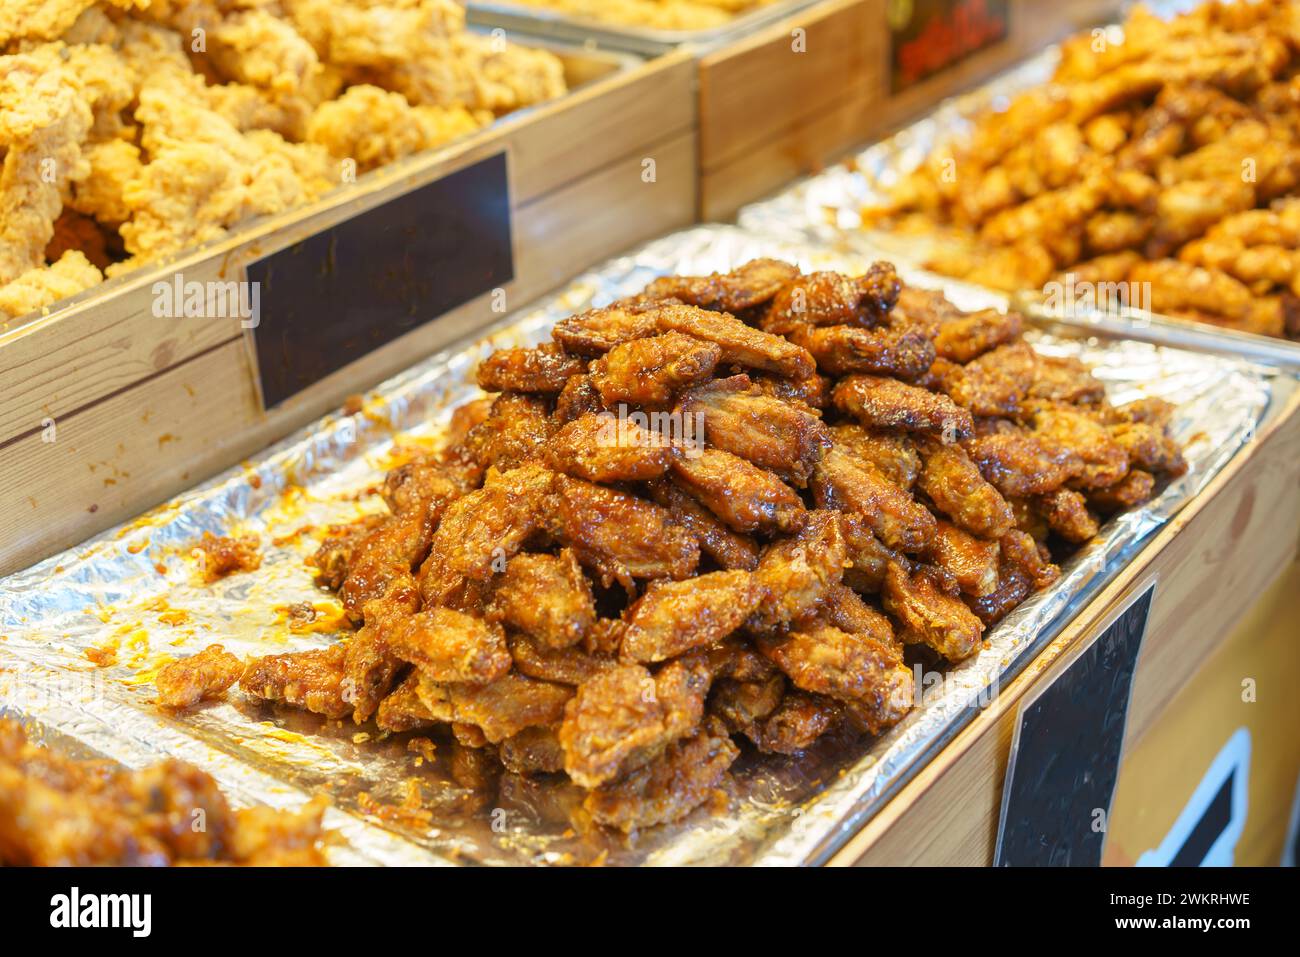 Generous portions of honey-glazed chicken wings, glistening and perfectly cooked, displayed at a food market stall Stock Photo